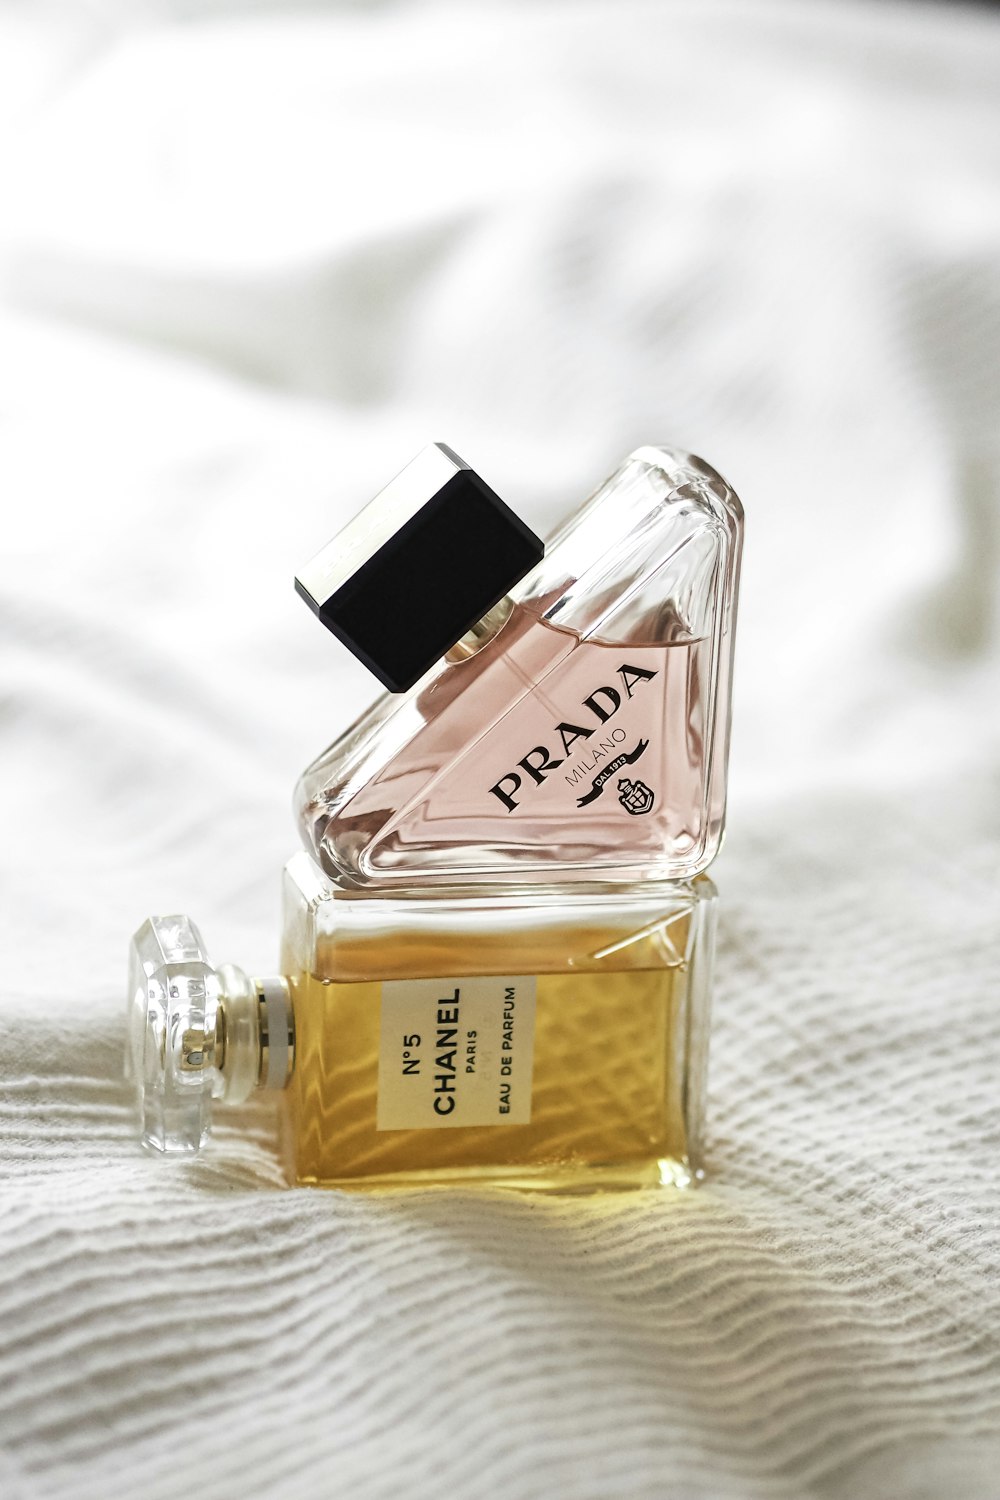 a bottle of perfume sitting on top of a bed